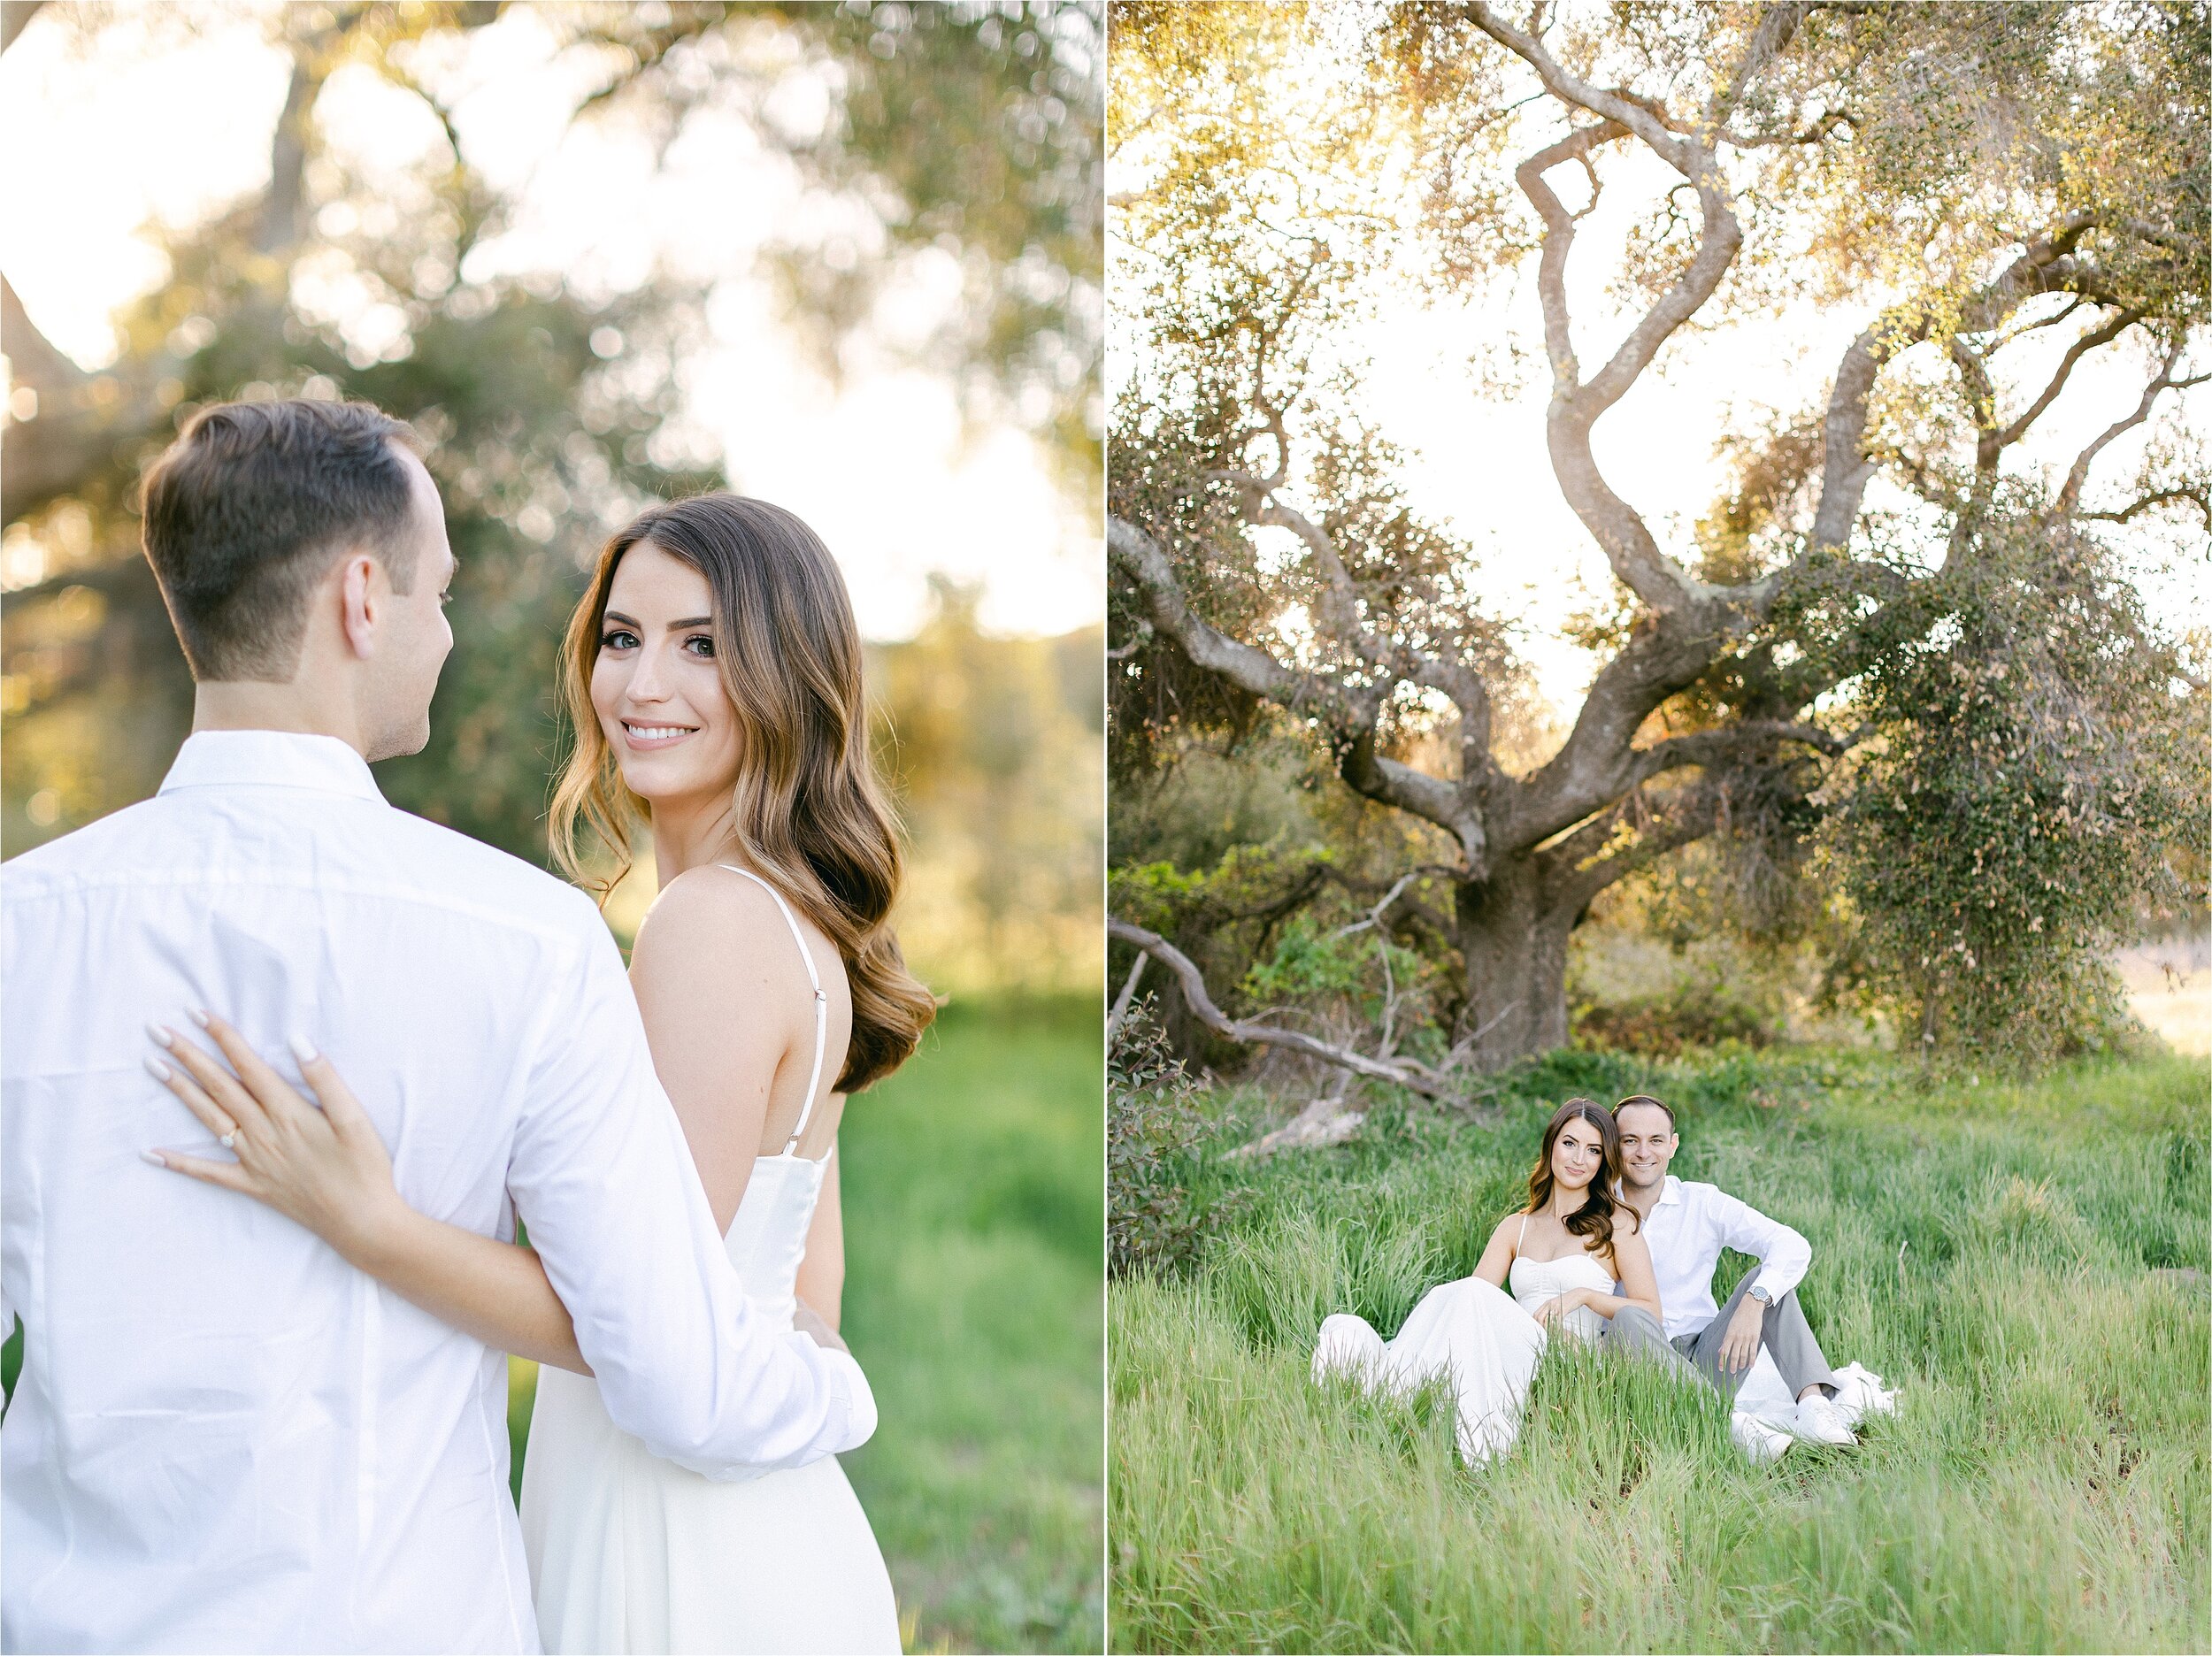 Brunette fiances, wearing a white chiffon dress and grey pants with a white button down, sit in a field of tall grass under an oak tree during their romantic engagement photography session. in Orange County, CA.